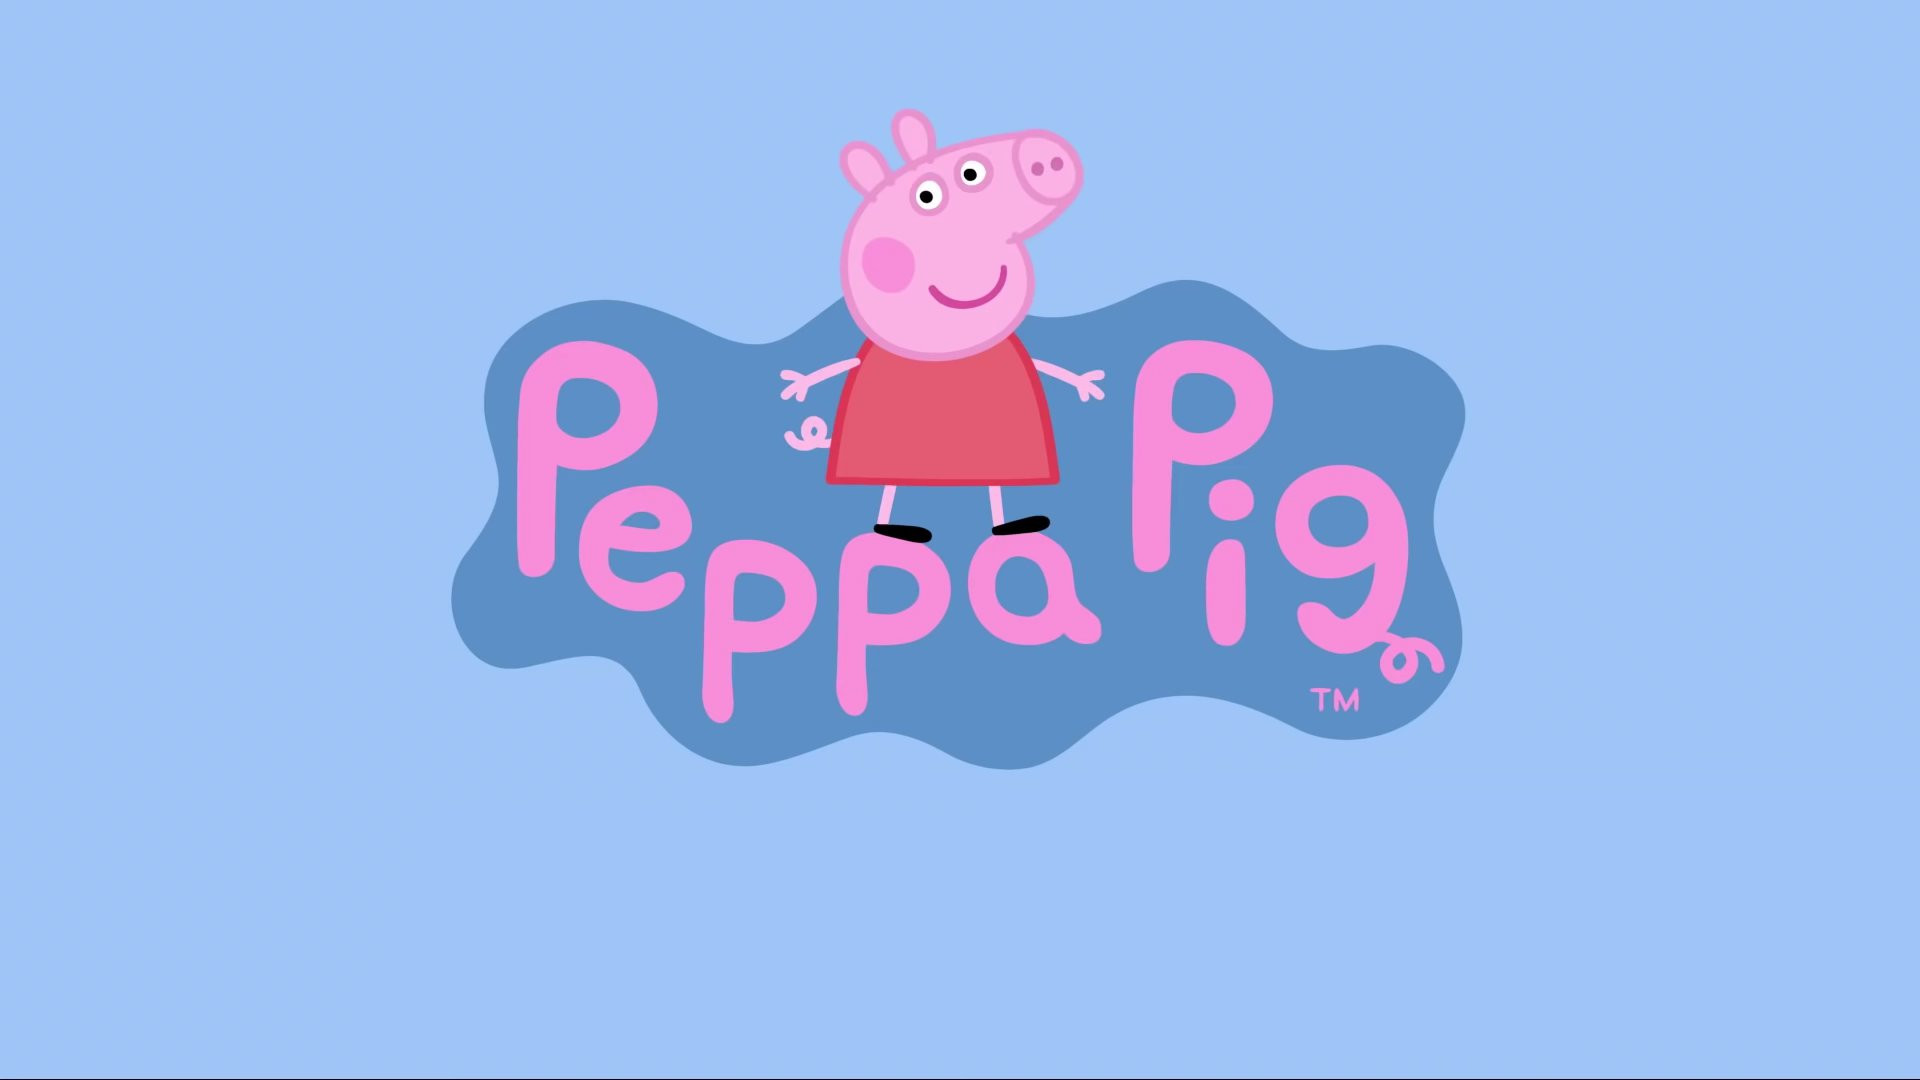 Peppa Pig is heading to America as she takes Hollywood in new special